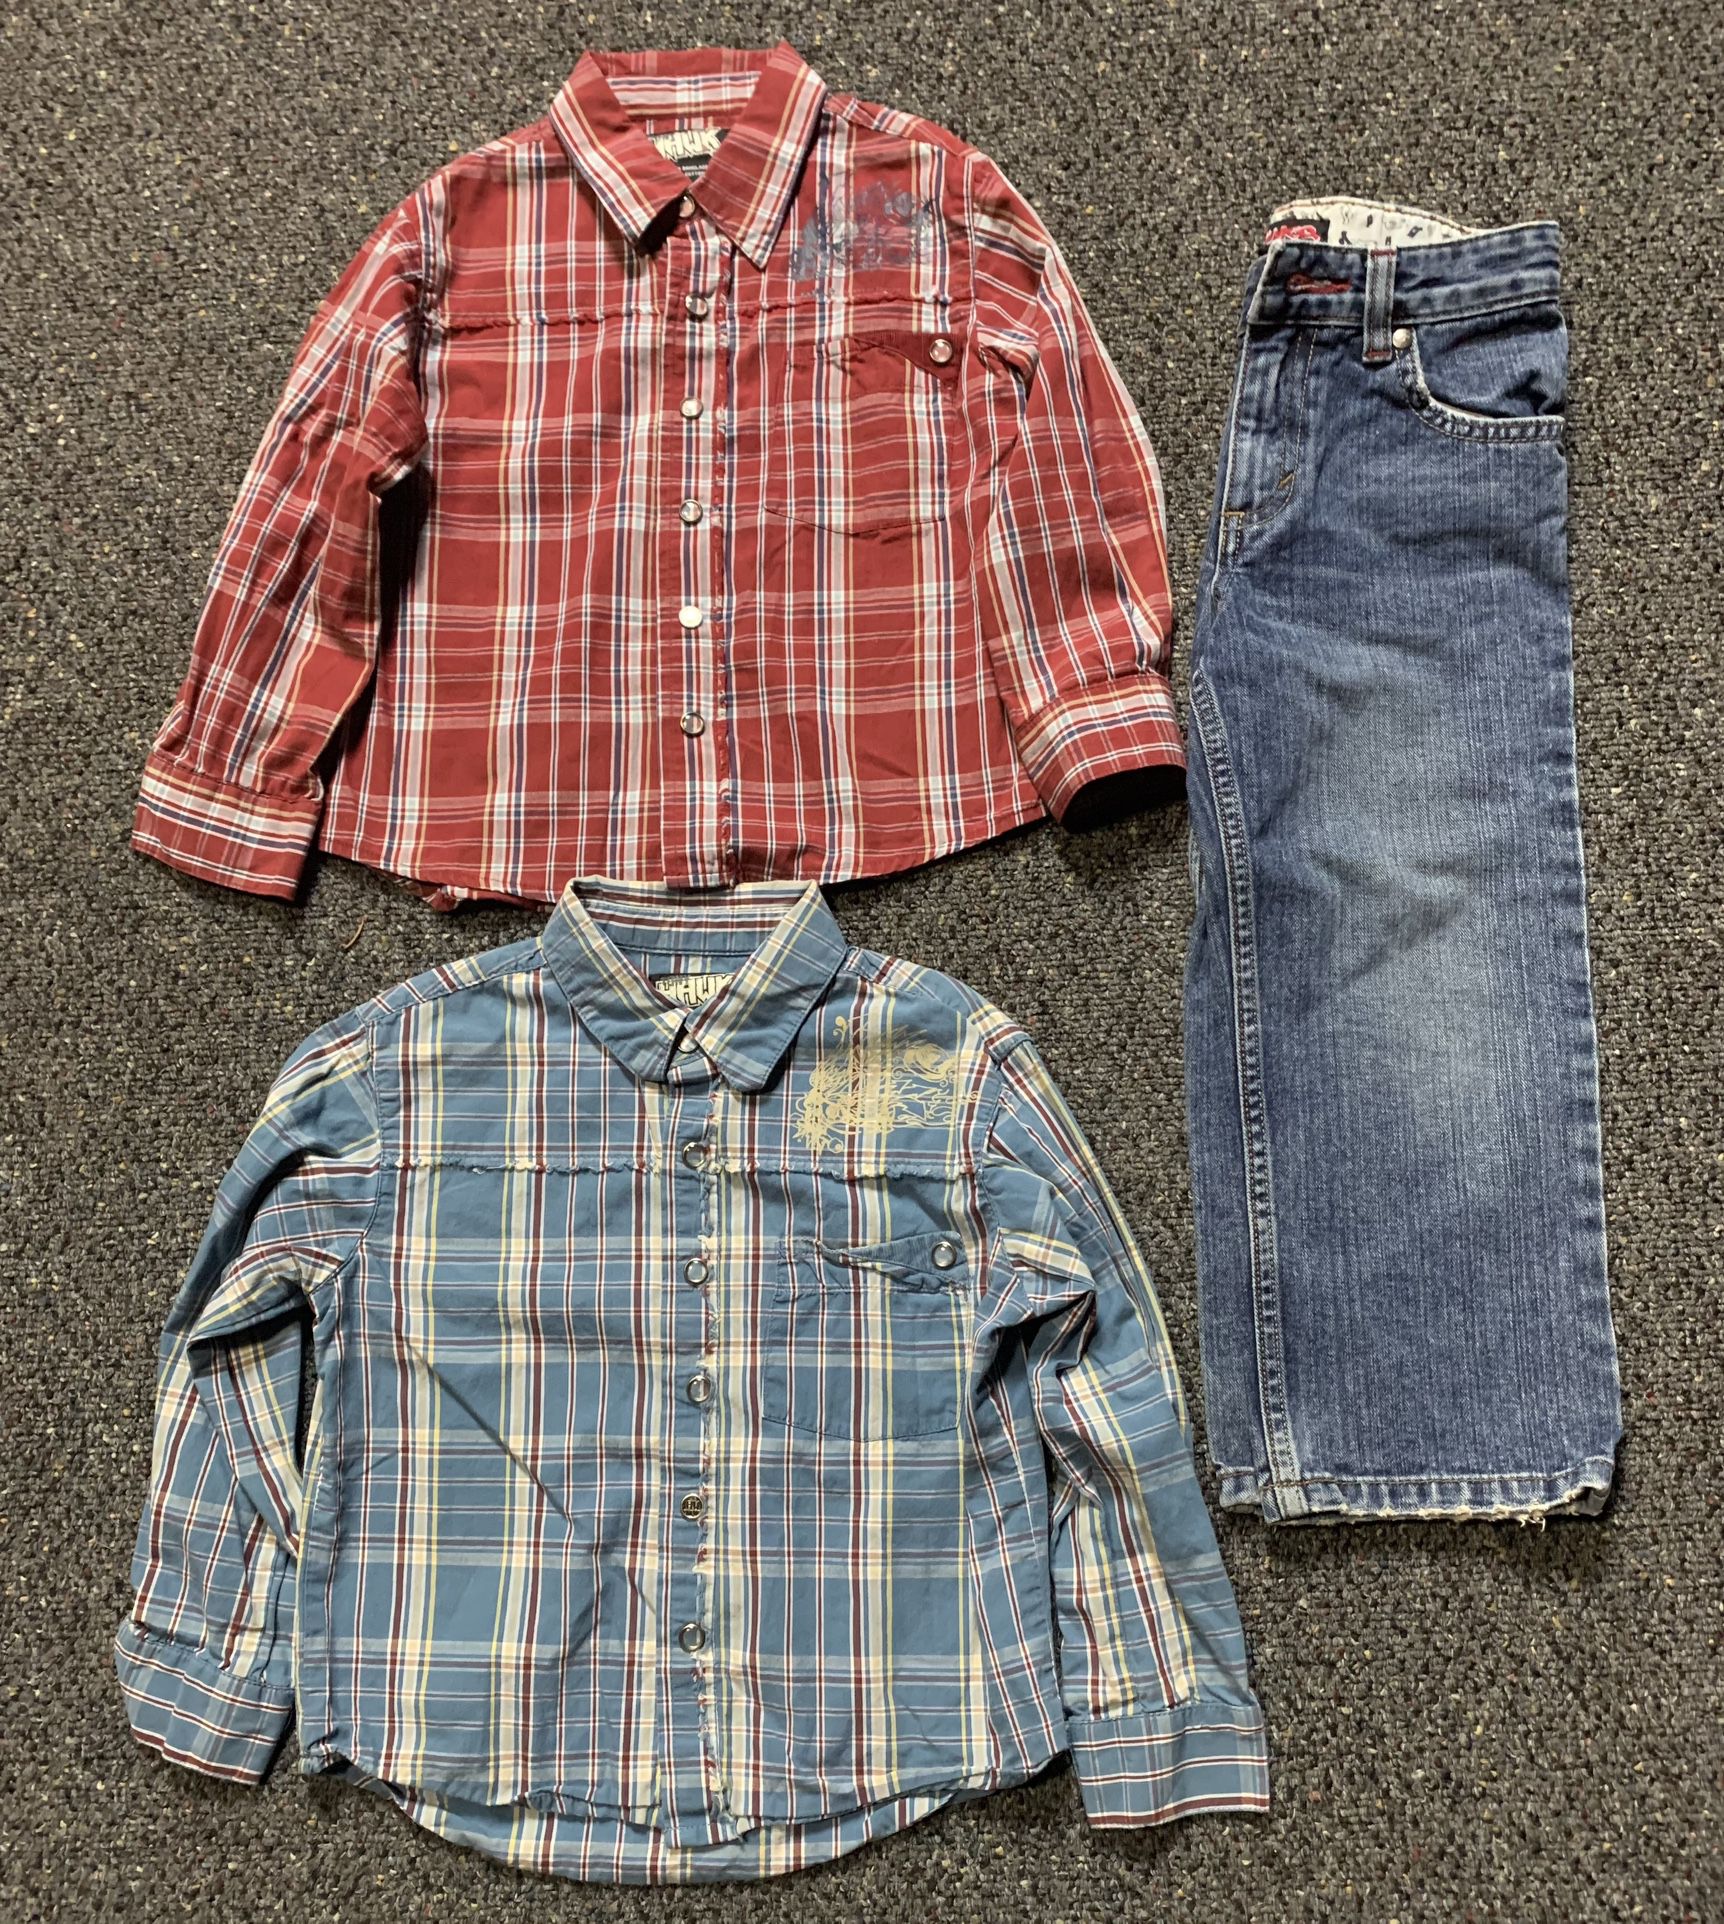 Two Tony Hawk boys size 4T plaid shirts and jeans 